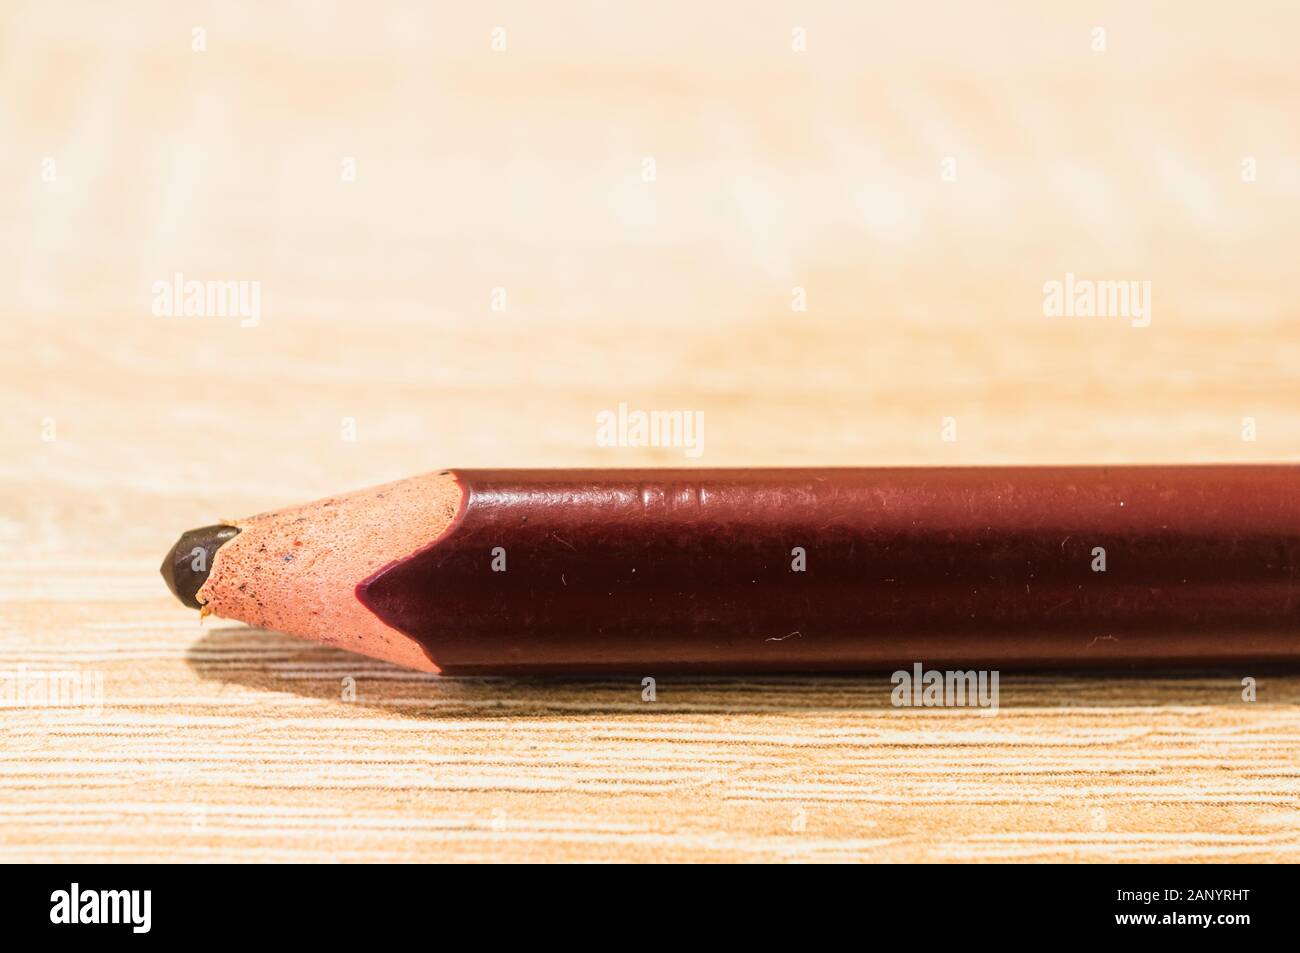 Closeup shot of a brown pencil on a wooden surface Stock Photo